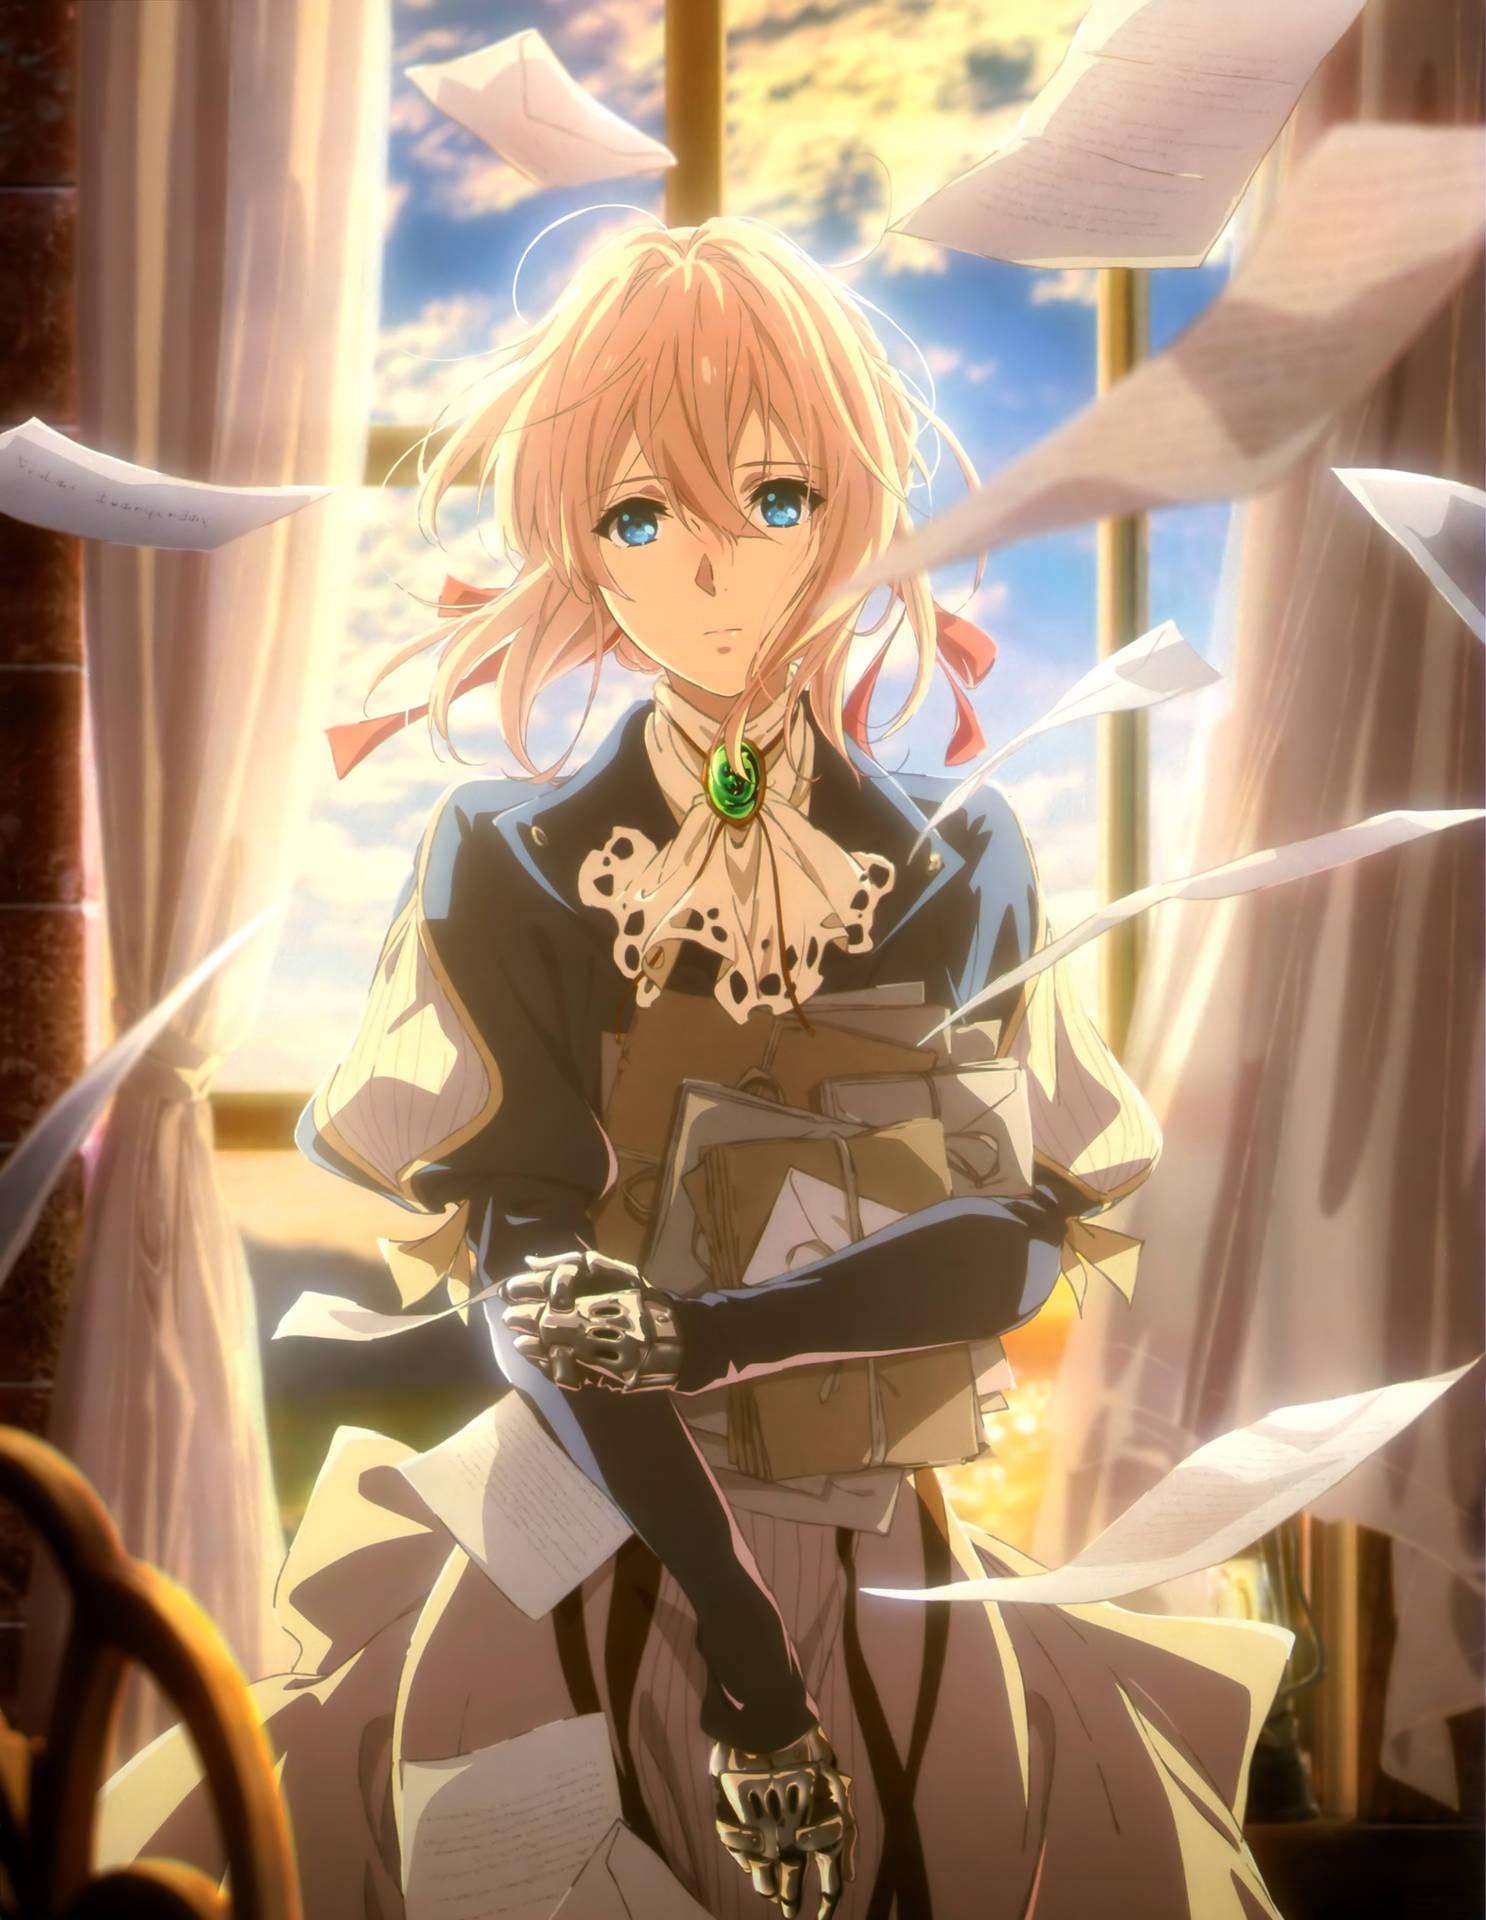 A magical, flying moment with Violet Evergarden. Wallpaper